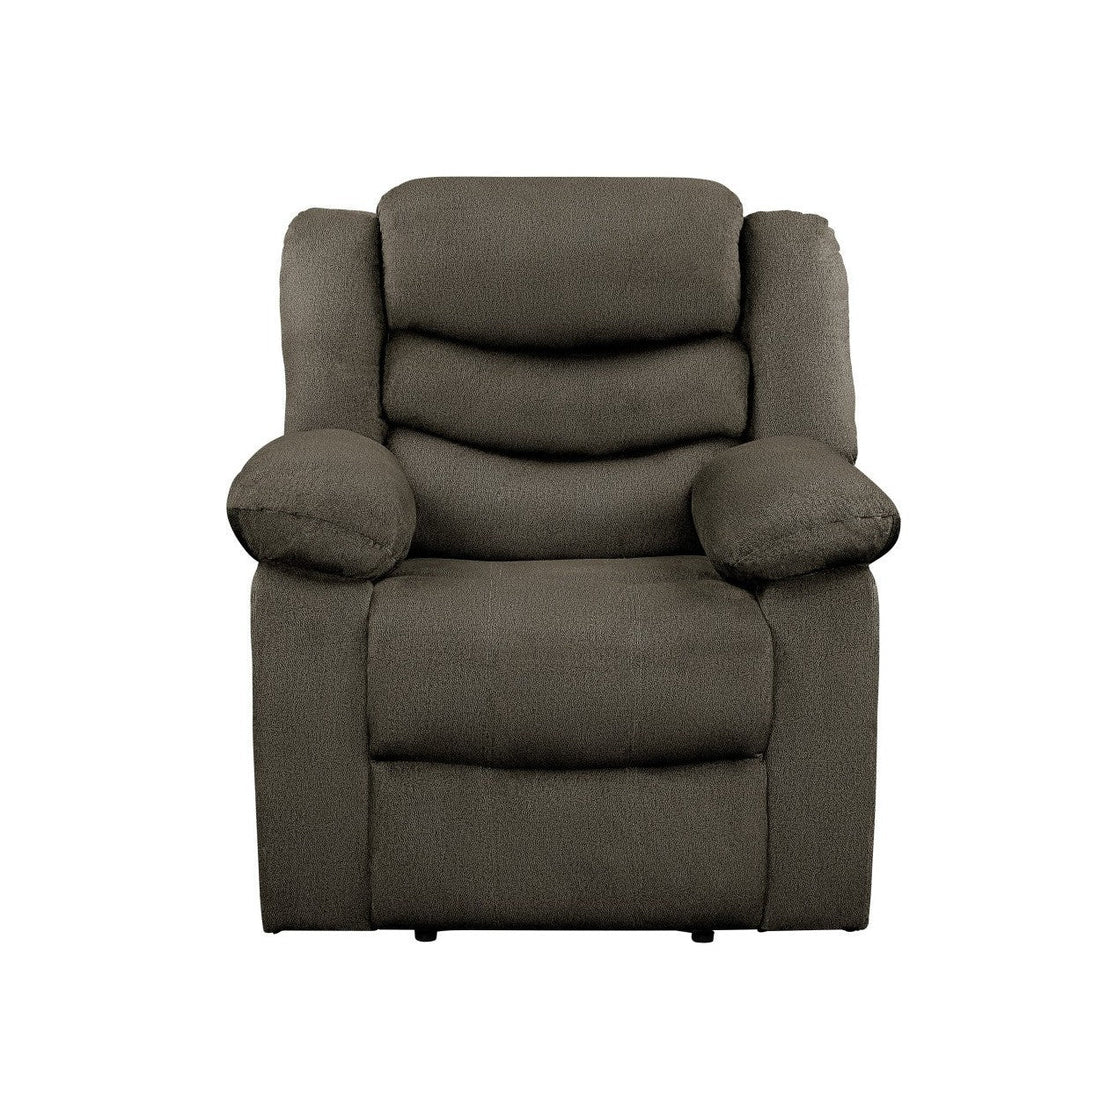 RECLINING CHAIR, BROWN 100% POLYESTER 9526BR-1